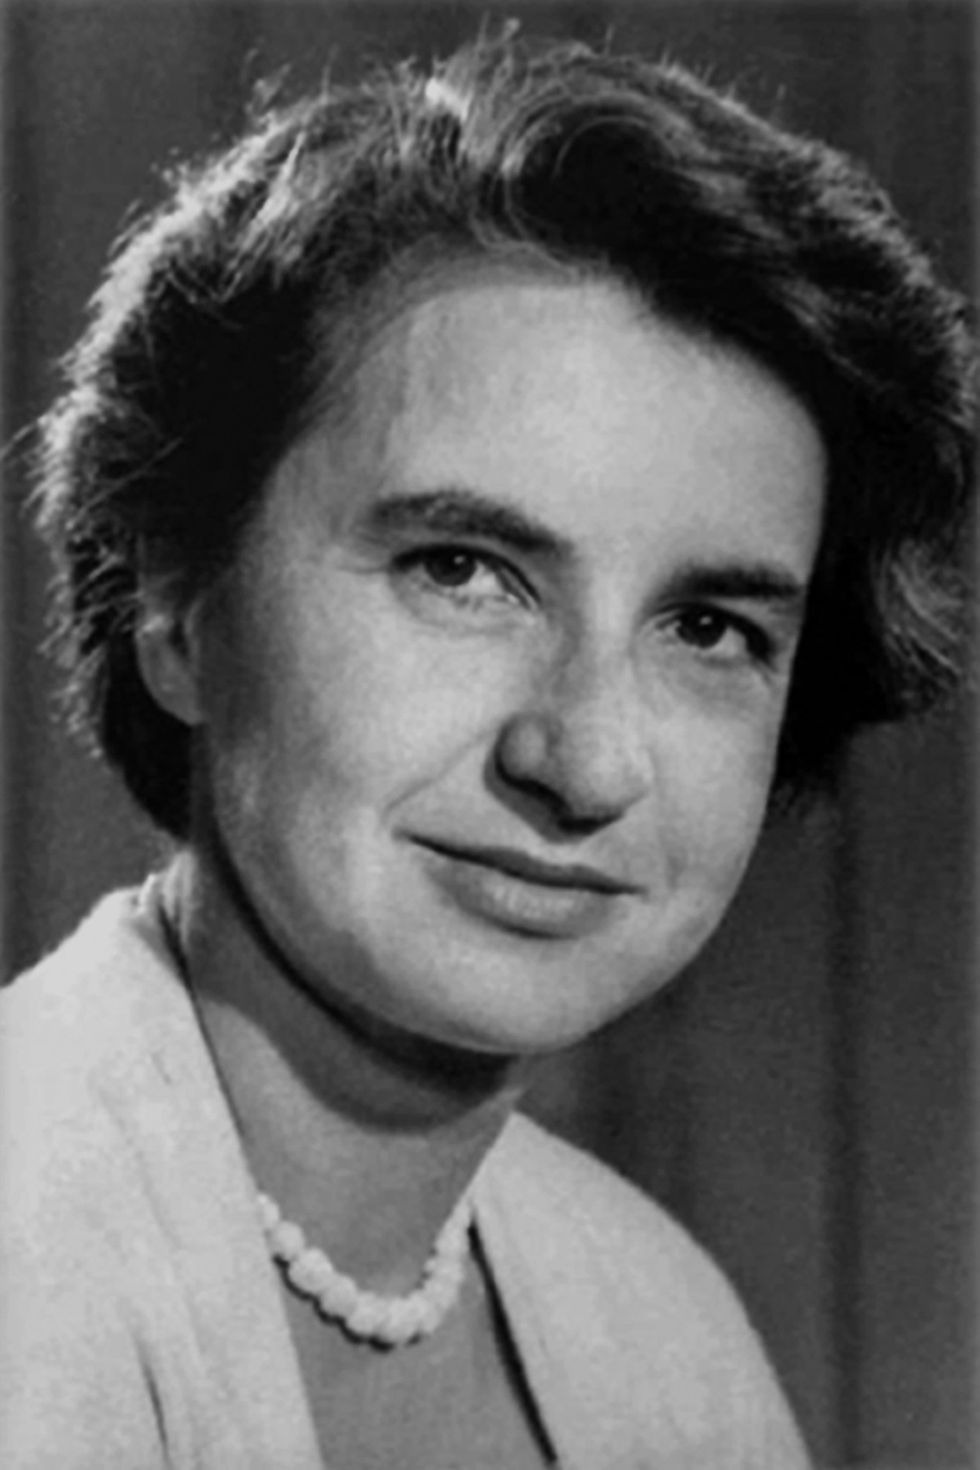 scientist rosalind franklin posing for photograph looking to her right